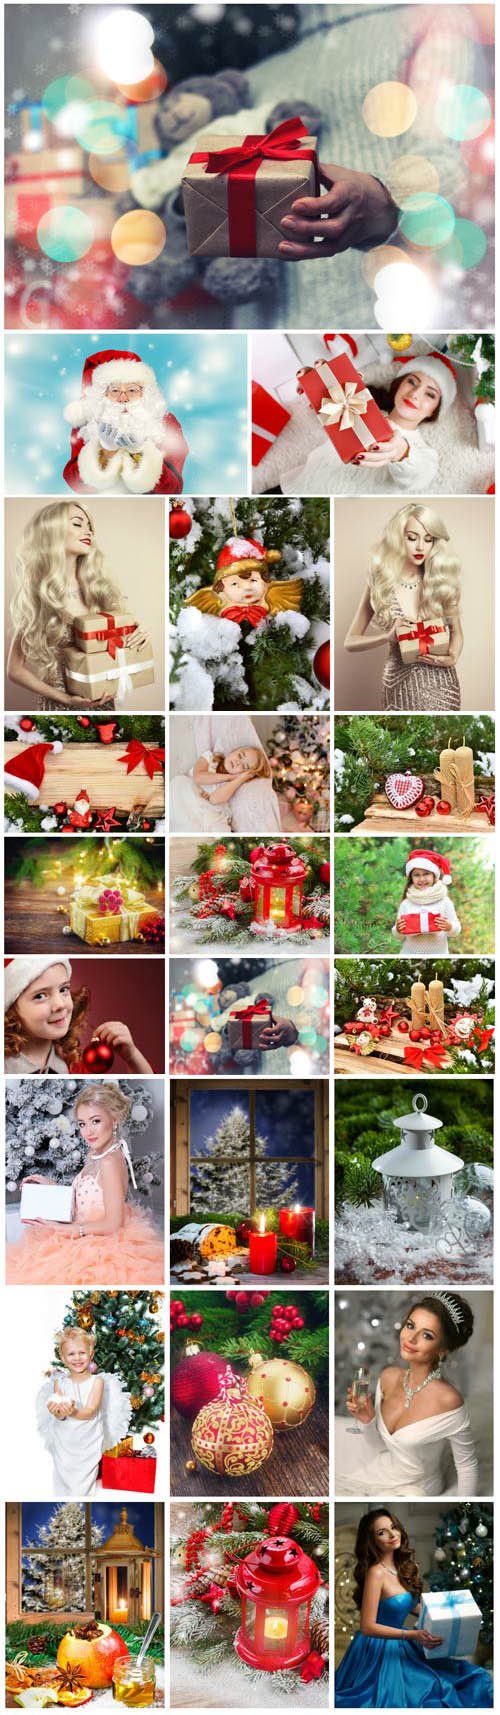 New Year and Christmas stock photos №76